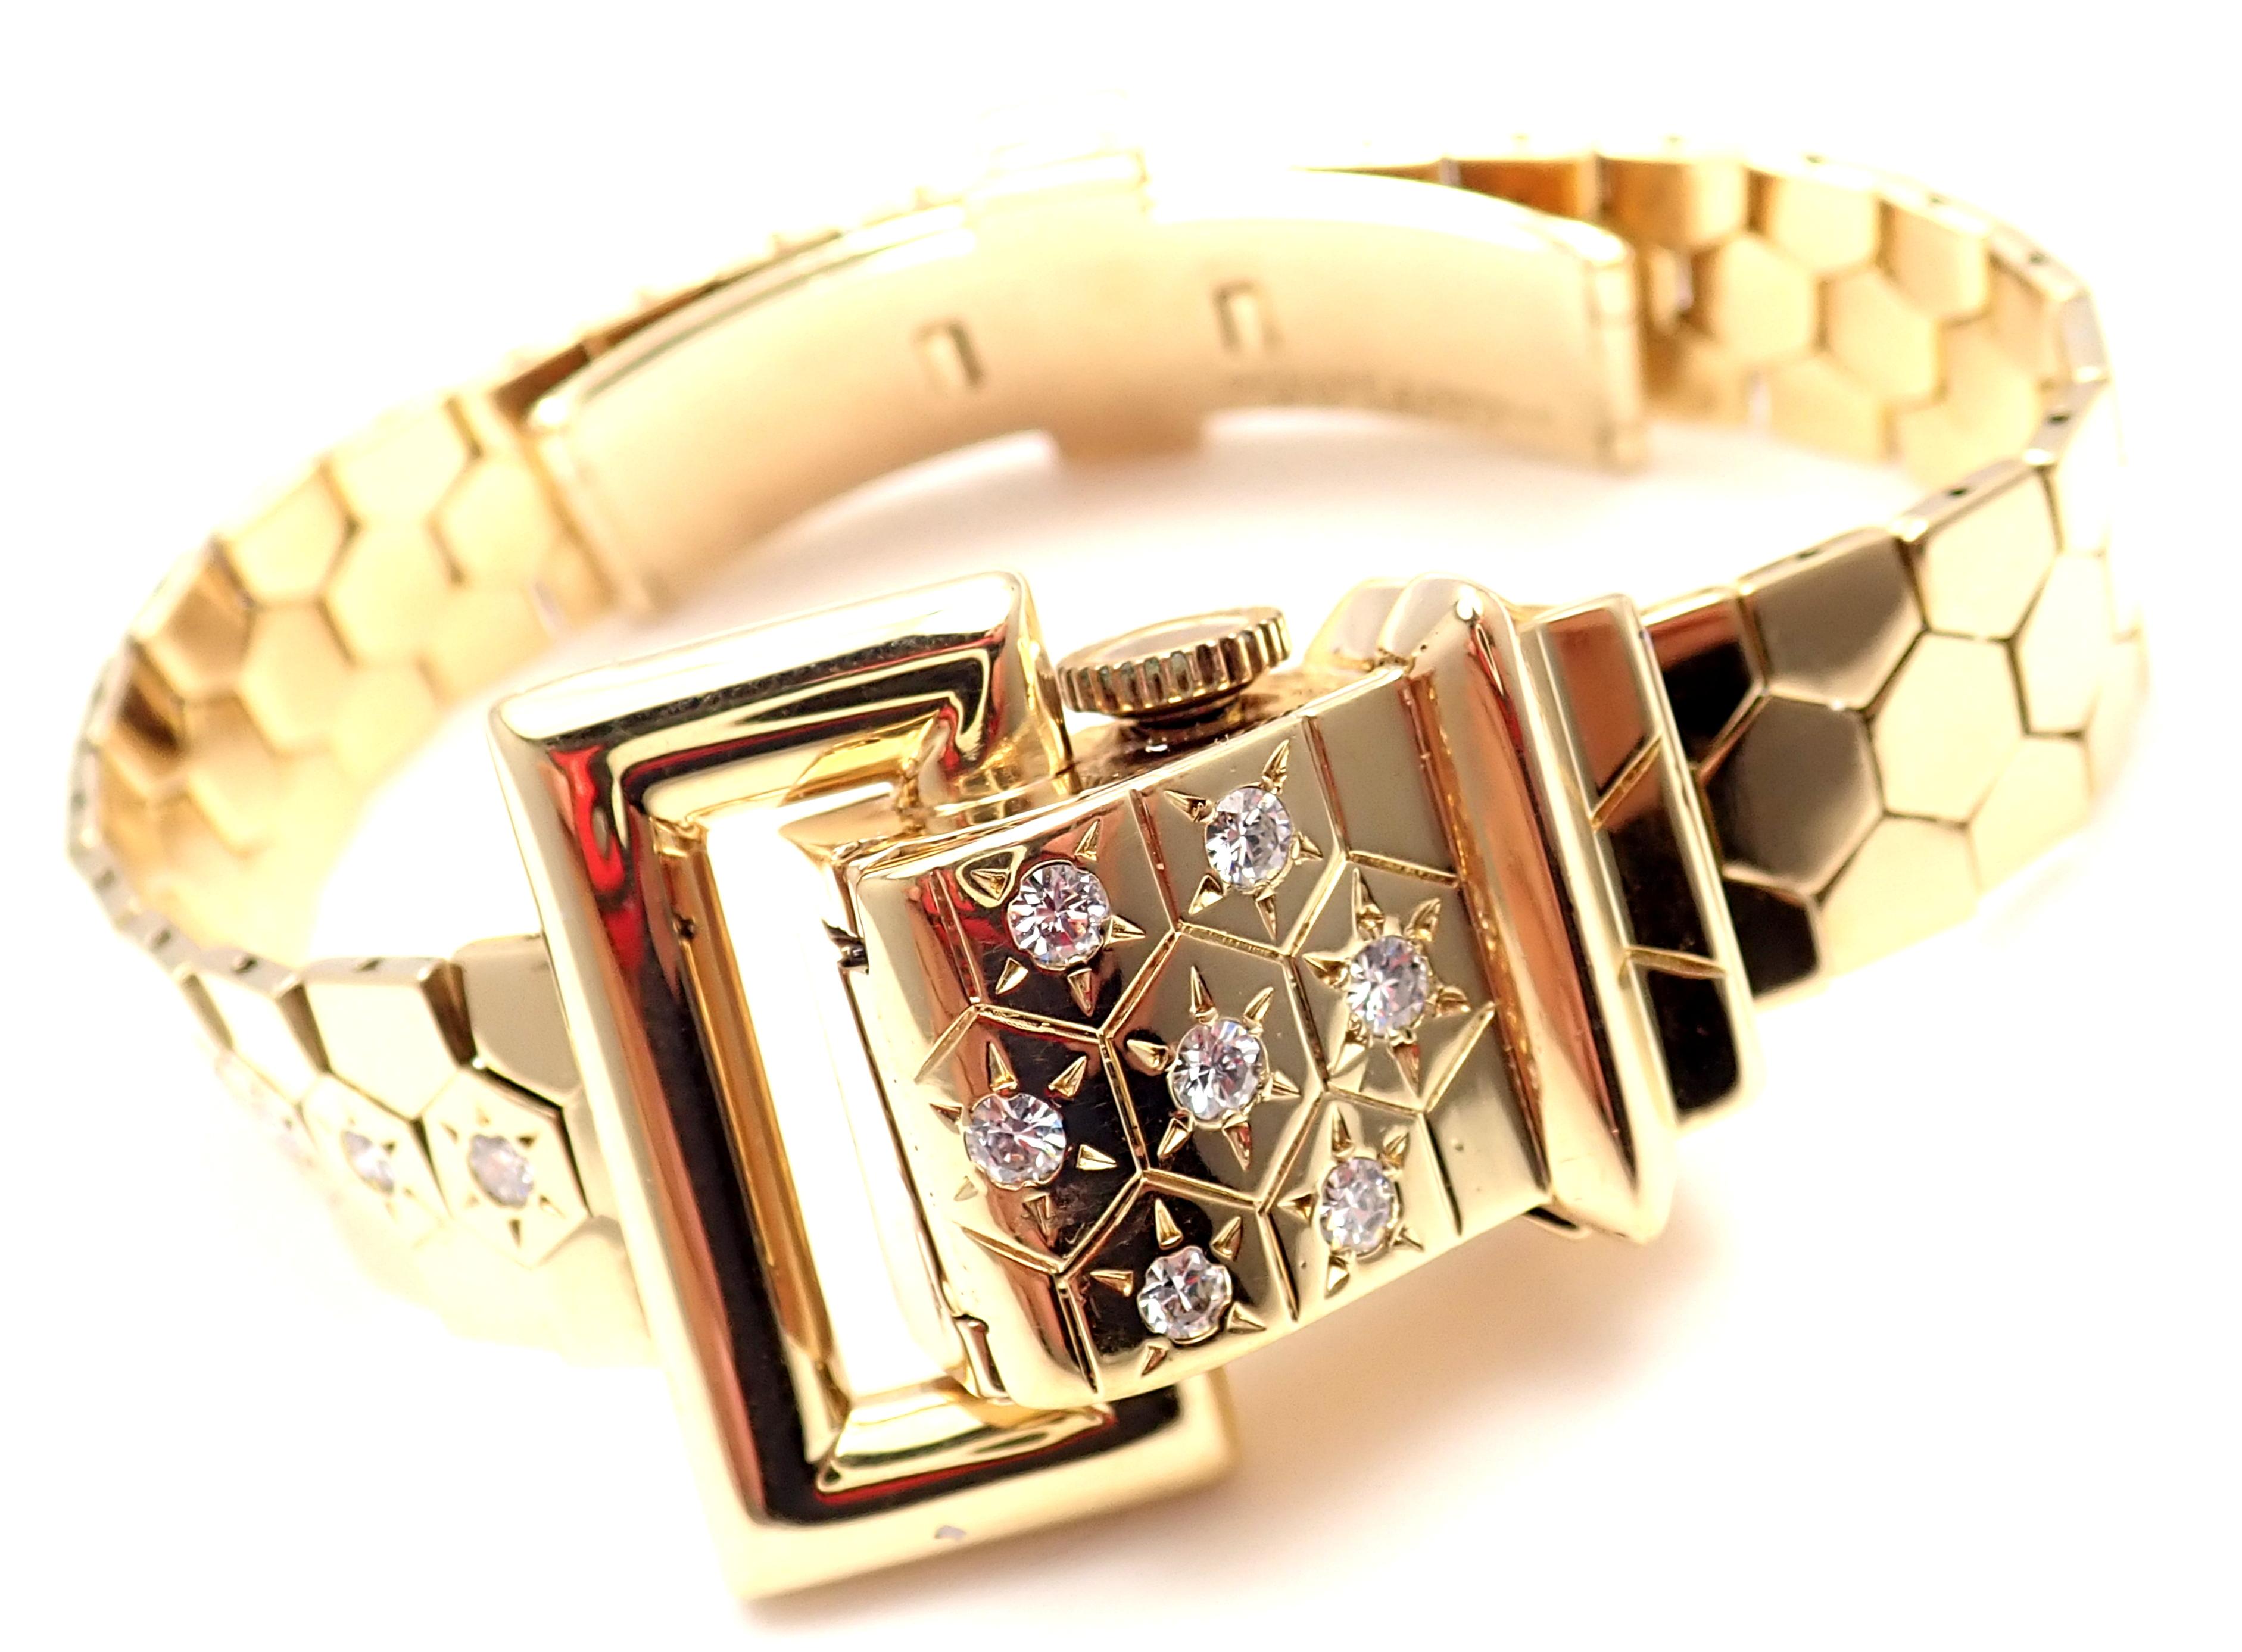 18k Yellow Gold Diamond Ludo Hexagone Buckle Wrist Watch by Van Cleef & Arpels. 
With Round brilliant cut diamonds VVS1 clarity E color 
7x on Lid
3x on Band
Total weight approximately 0.75ct
Details: 
Case Size: 13mm Width
21mm Height
Length: Fits